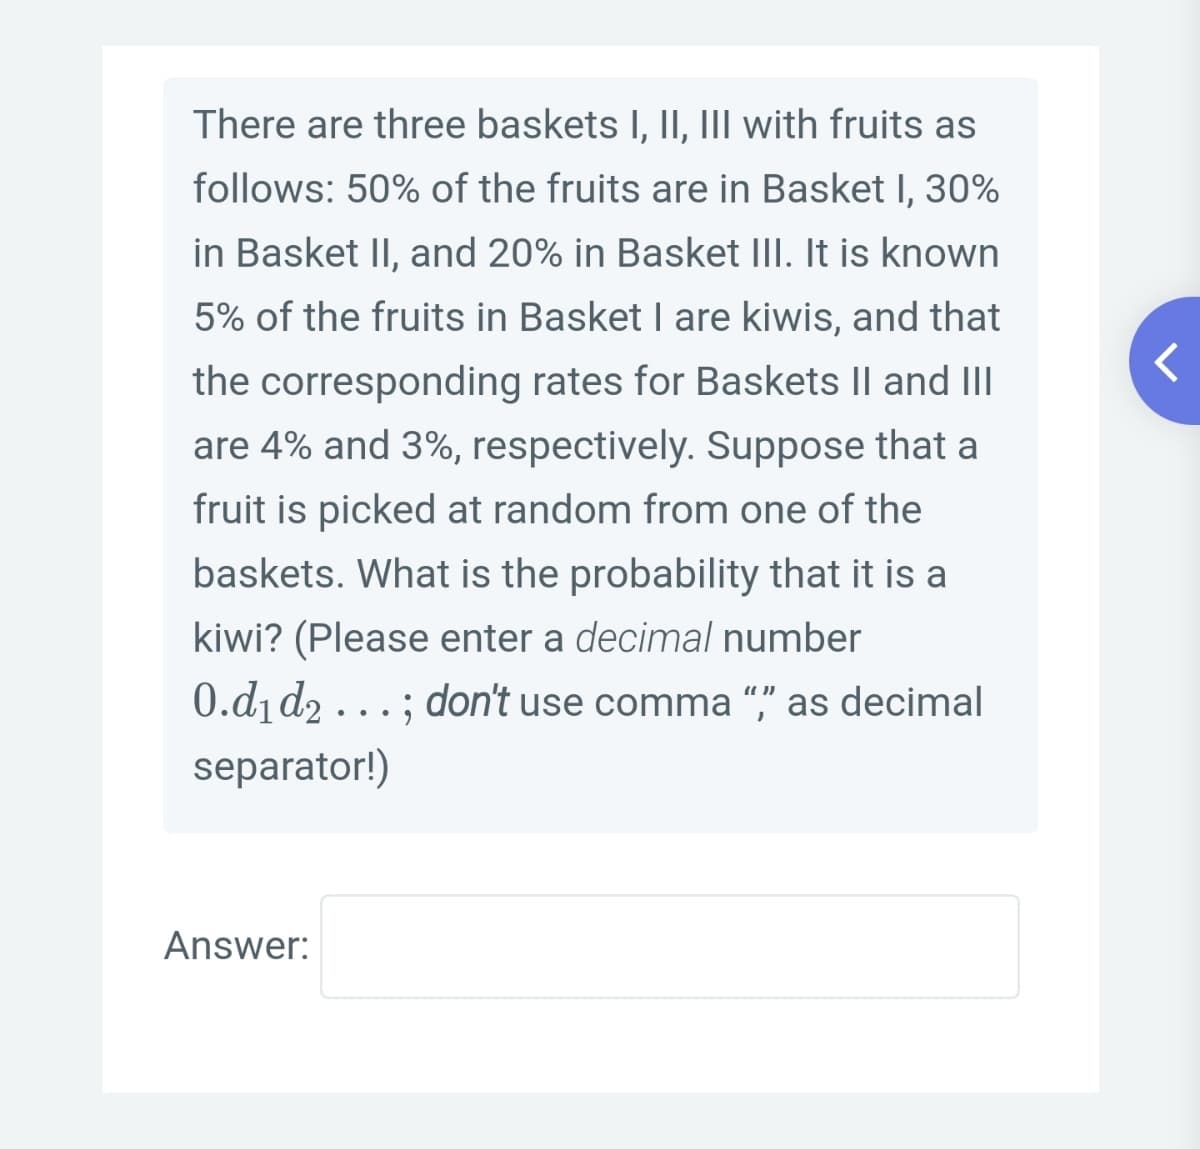 There are three baskets I, II, III with fruits as
follows: 50% of the fruits are in Basket I, 30%
in Basket II, and 20% in Basket III. It is known
5% of the fruits in Basket I are kiwis, and that
the corresponding rates for Baskets || and III
are 4% and 3%, respectively. Suppose that a
fruit is picked at random from one of the
baskets. What is the probability that it is a
kiwi? (Please enter a decimal number
0.d1 d2...; don't use comma "," as decimal
separator!)
Answer:
